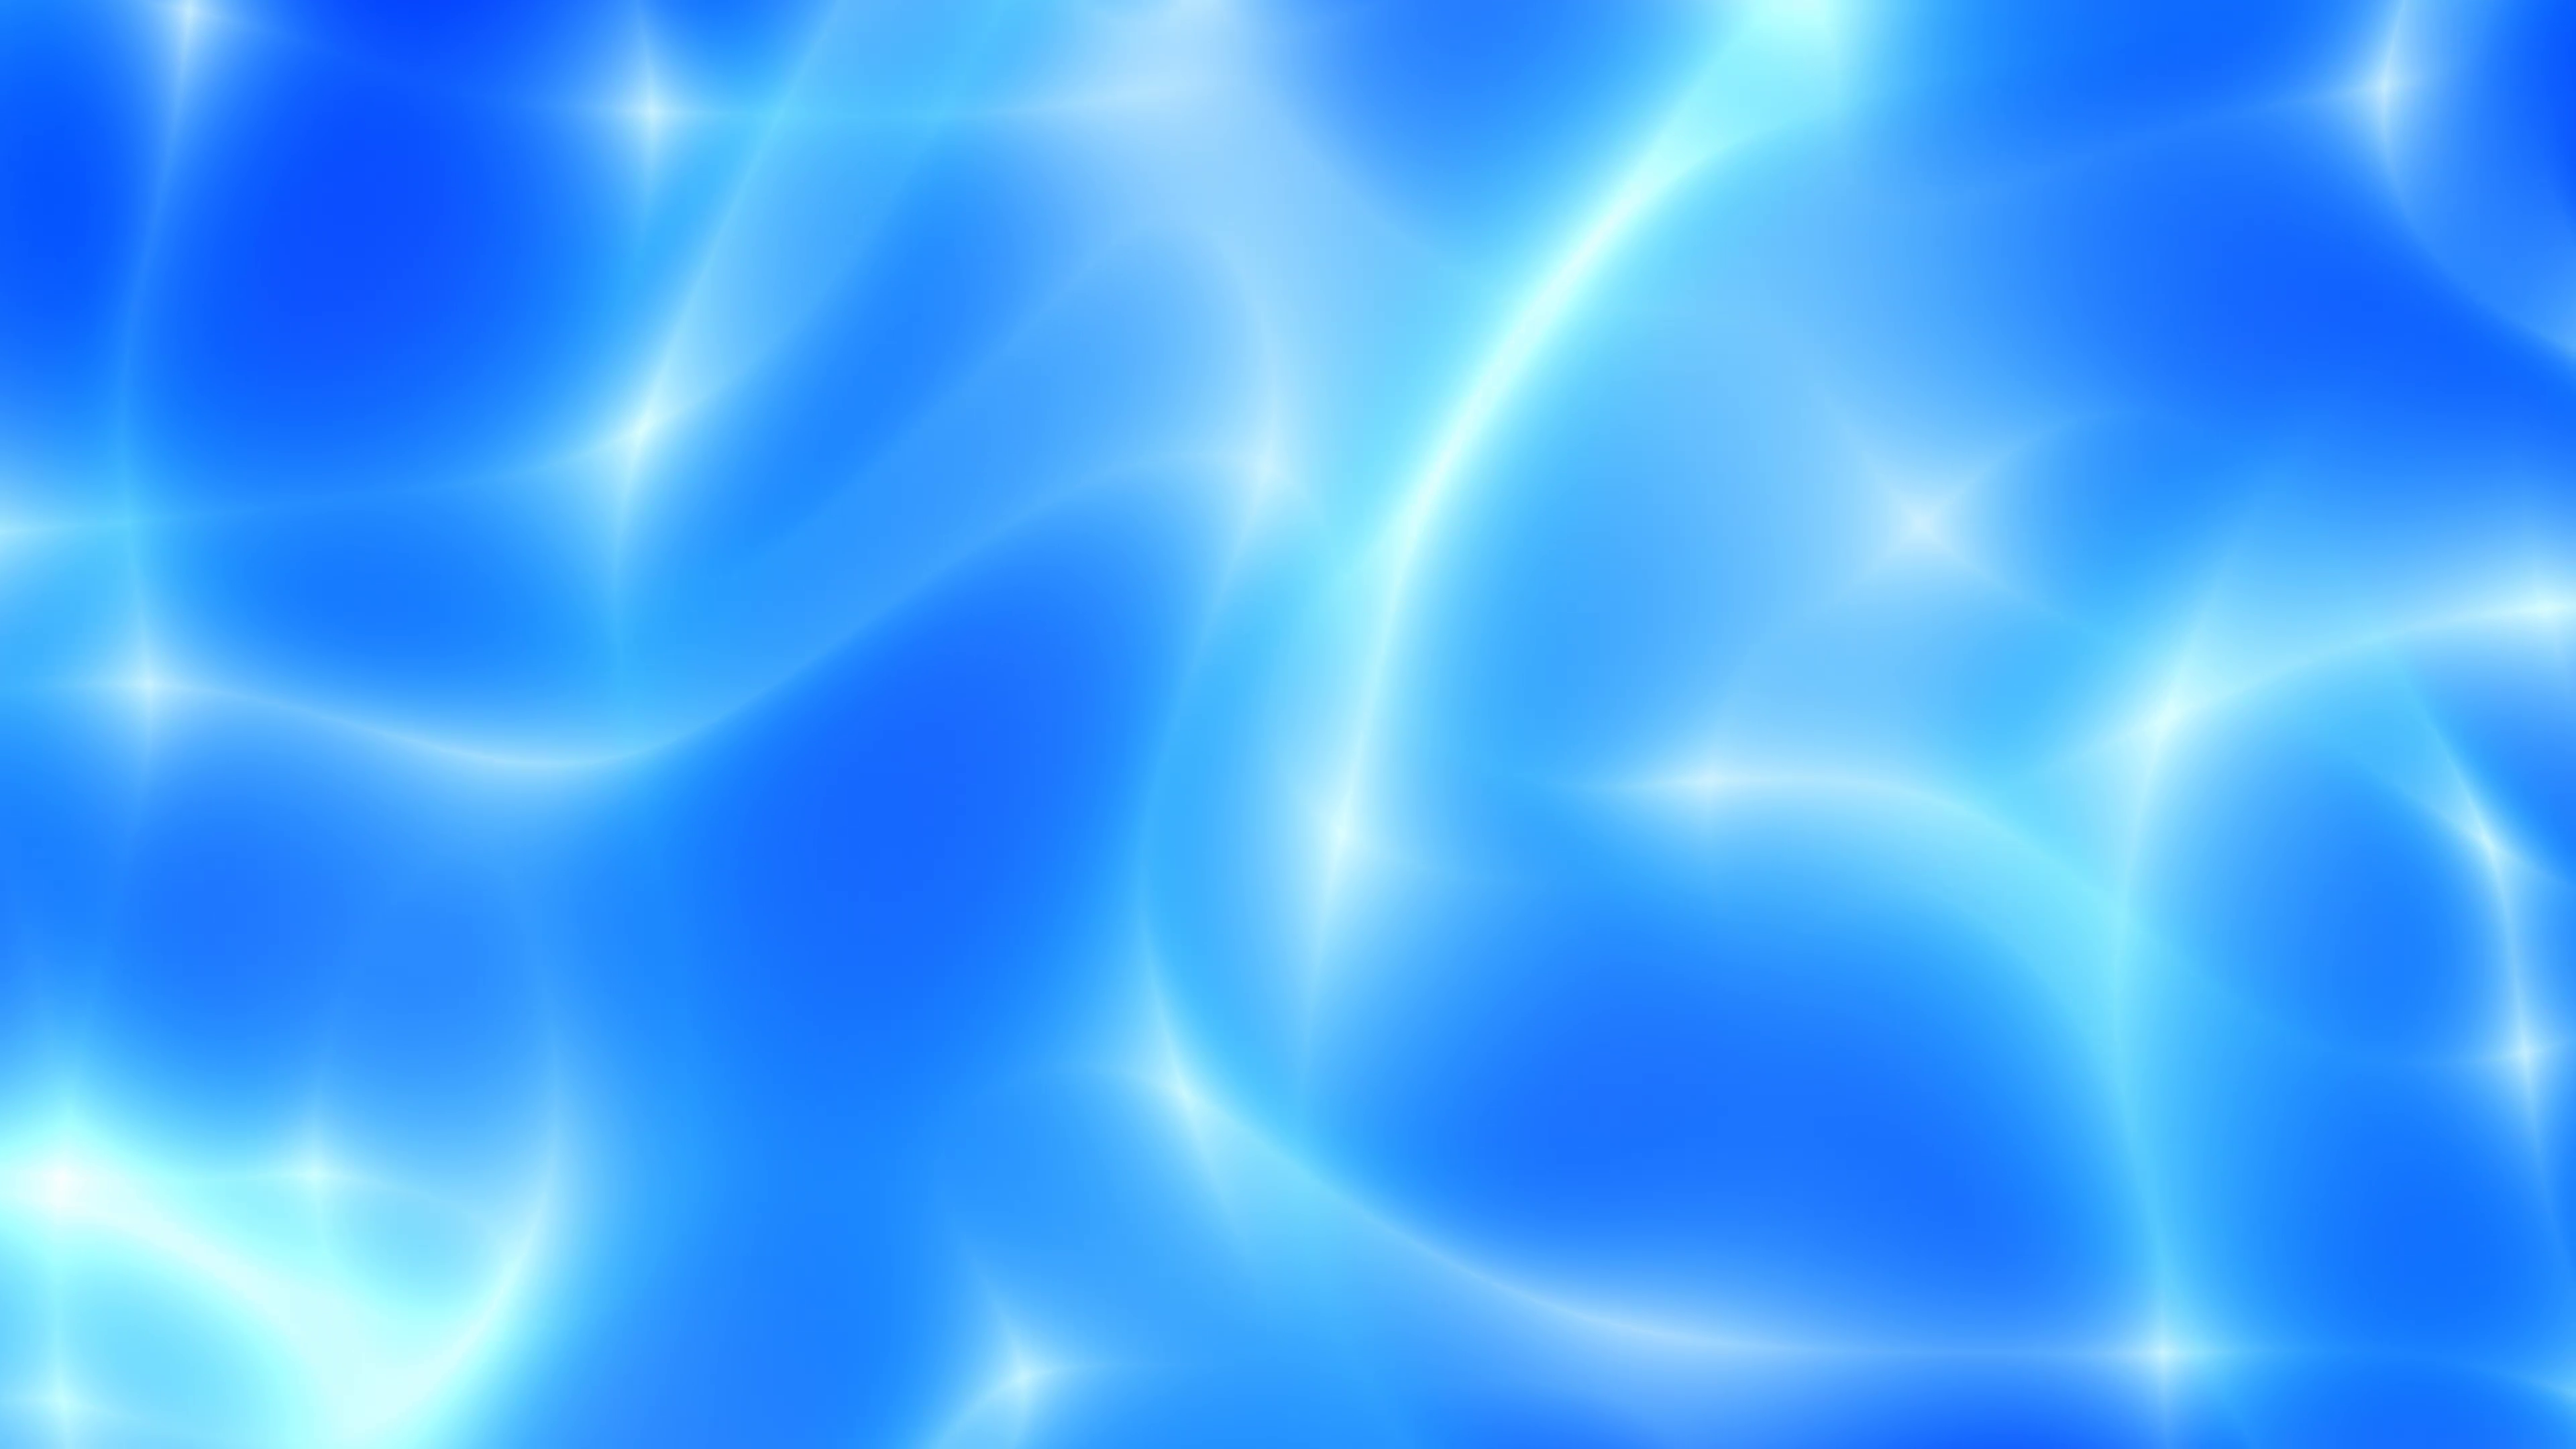 Flowing Blue Smooth Abstract Fractal Background Loop 3 Motion ...